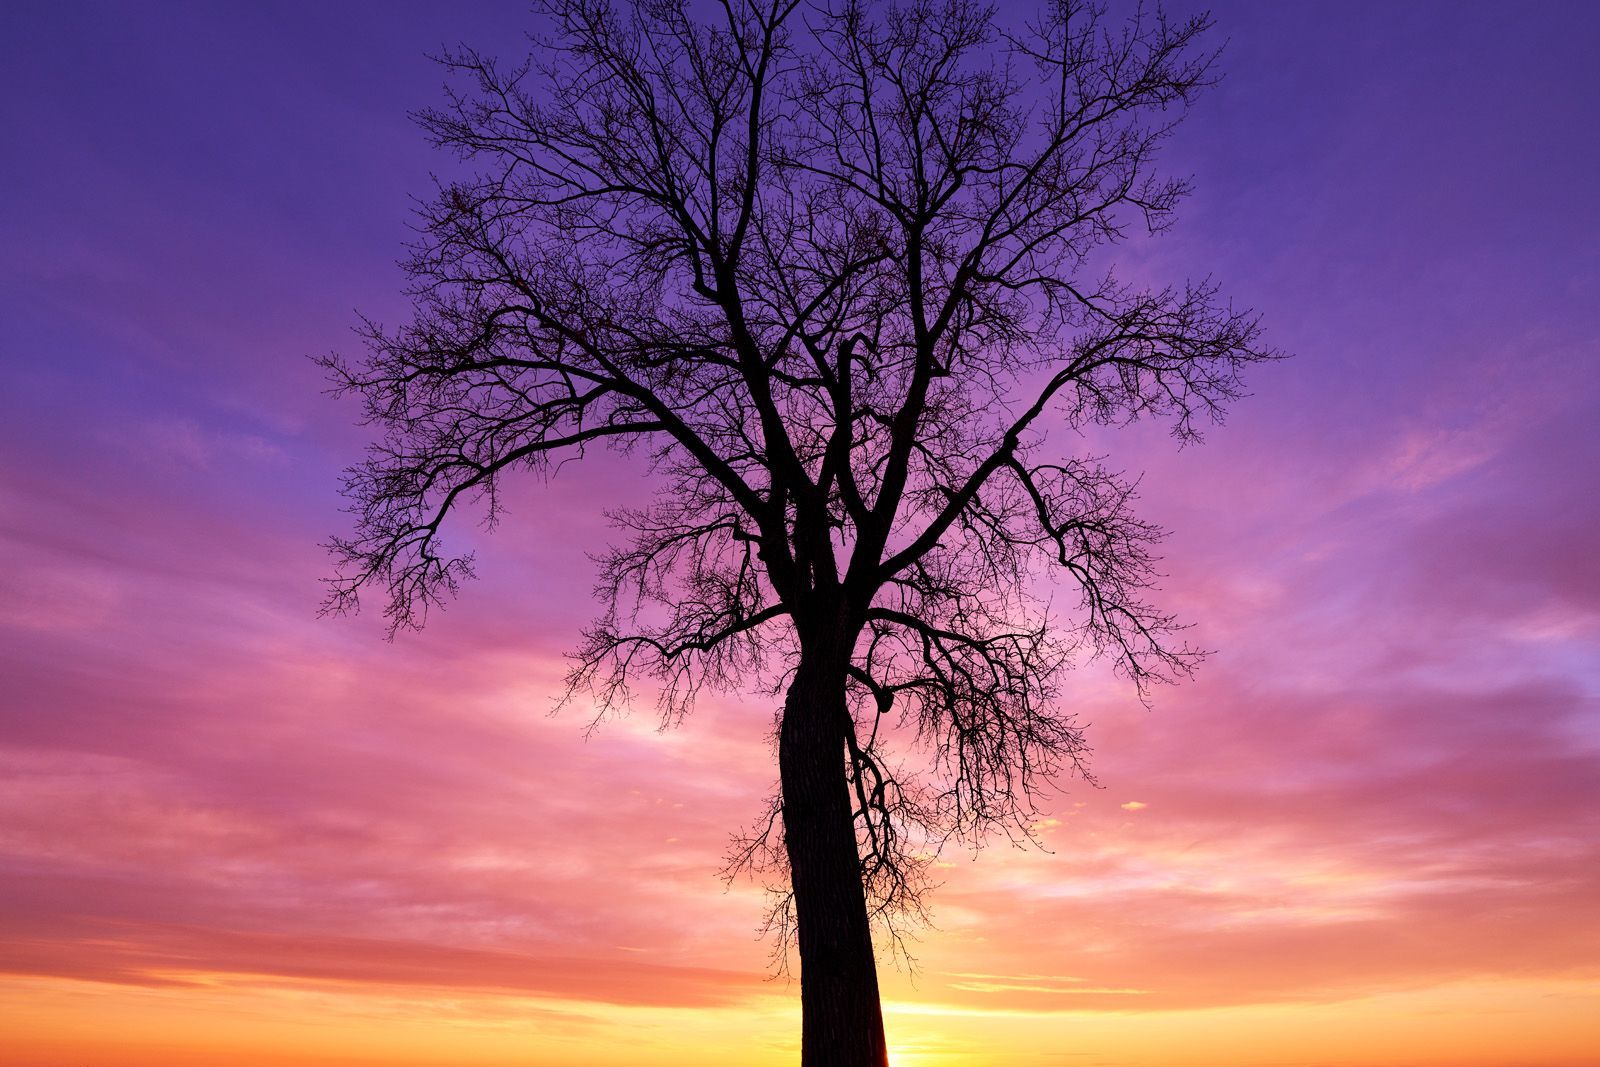 My favourite tree at sunset near Winkler, Manitoba Canada.